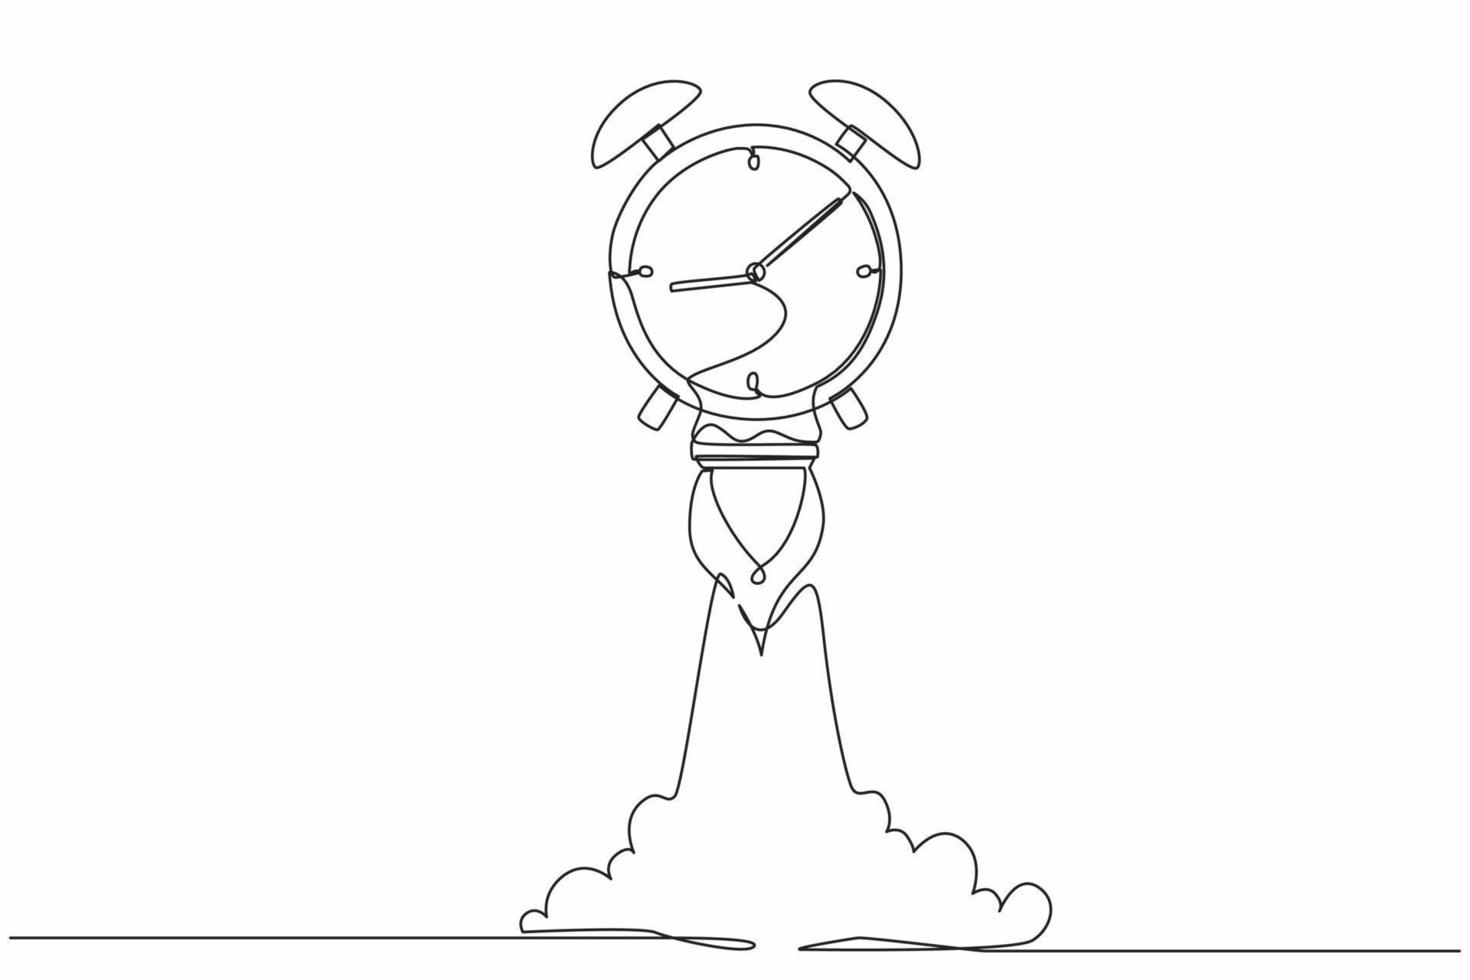 Single one line drawing rocket launch with big alarm clock. Future technology development. Artificial intelligence and machine learning process. Continuous line draw design graphic vector illustration